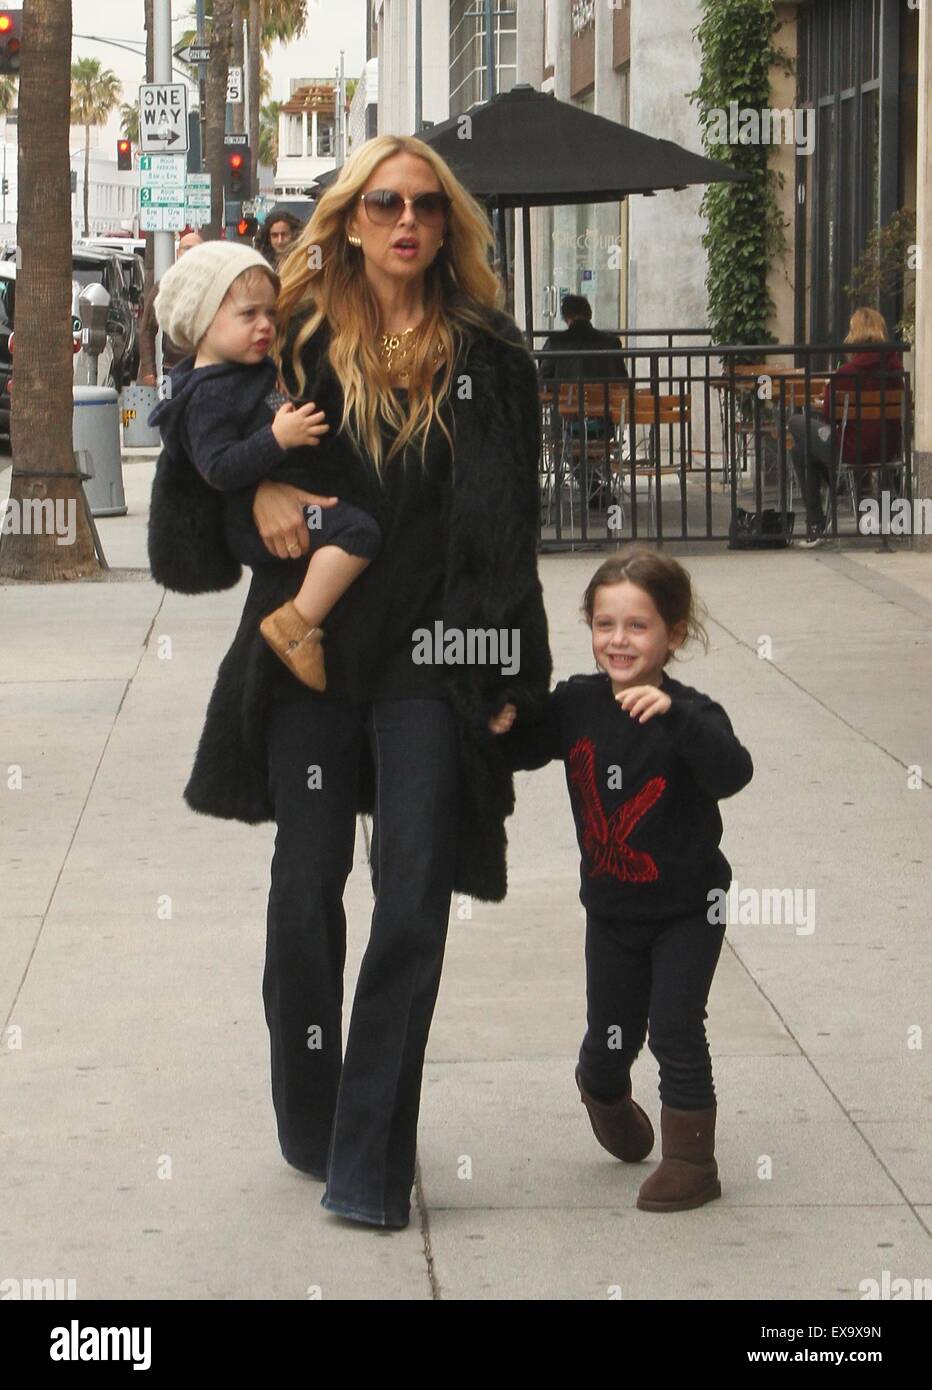 Rachel Zoe takes her sons Skyler and Kaius Berman out to lunch in Beverly  Hills. Skyler is excited to have his photo taken. Featuring: Rachel Zoe,  Skyler Berman, Kaius Berman Where: Los